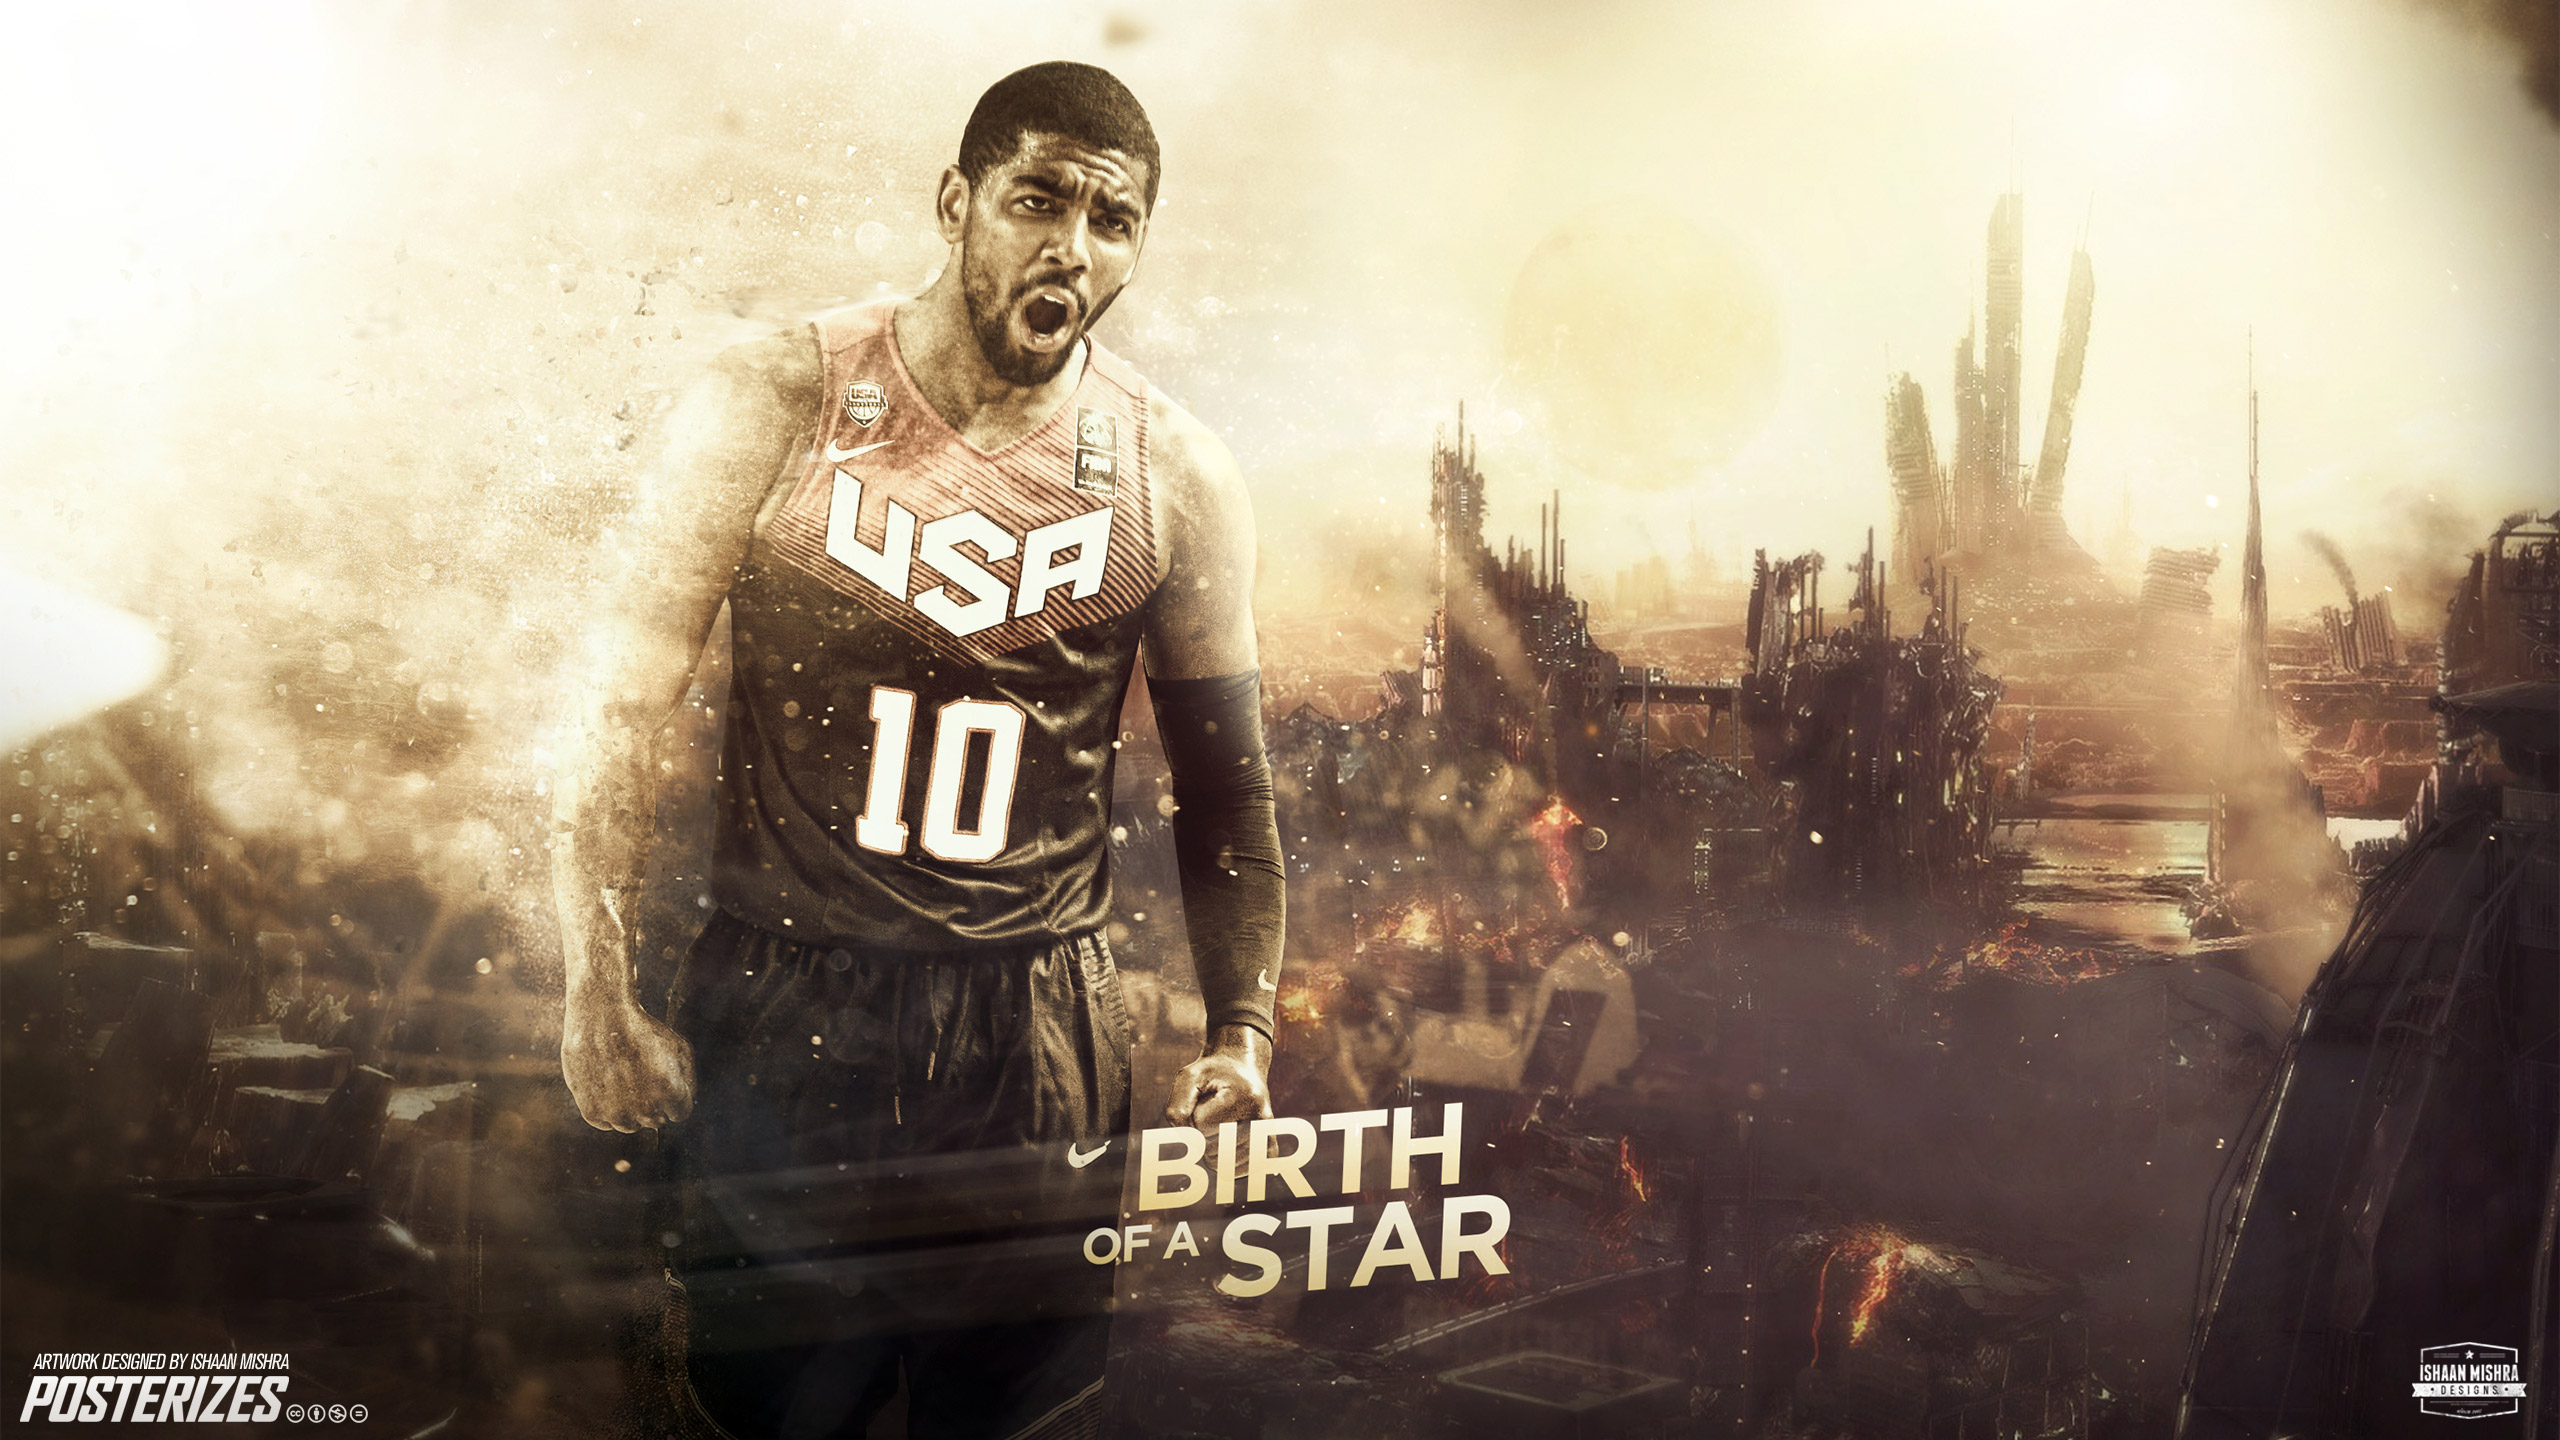 kyrie irving wallpaper,font,photography,graphics,pc game,logo